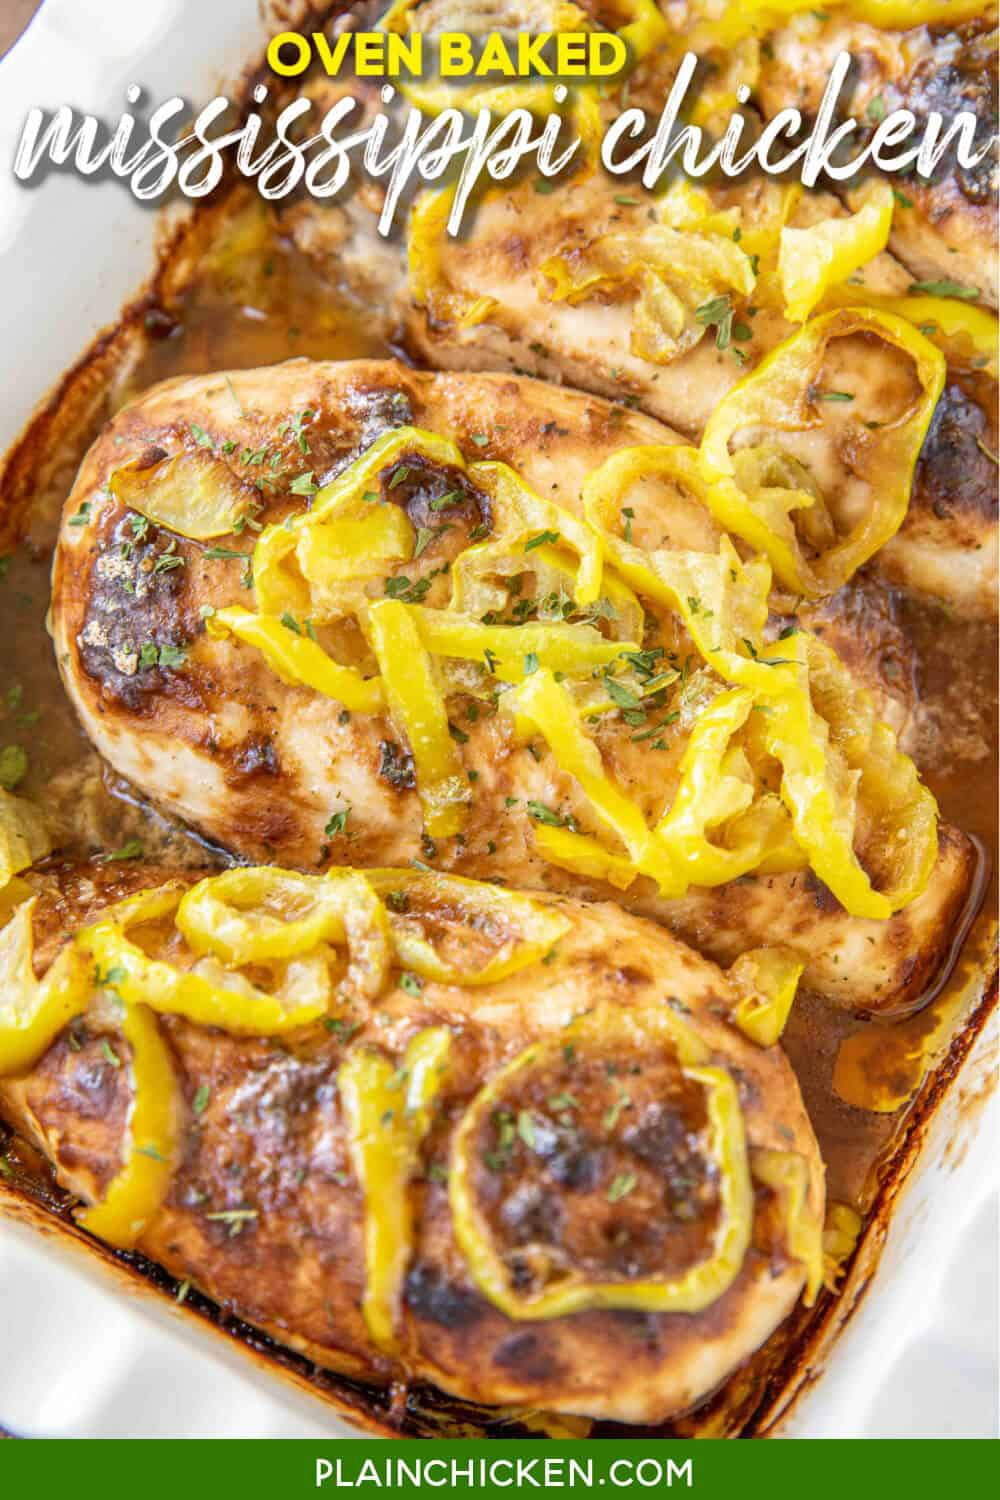 Oven Baked Mississippi Chicken (5 Ingredients) | Ramonadeb | Copy Me That